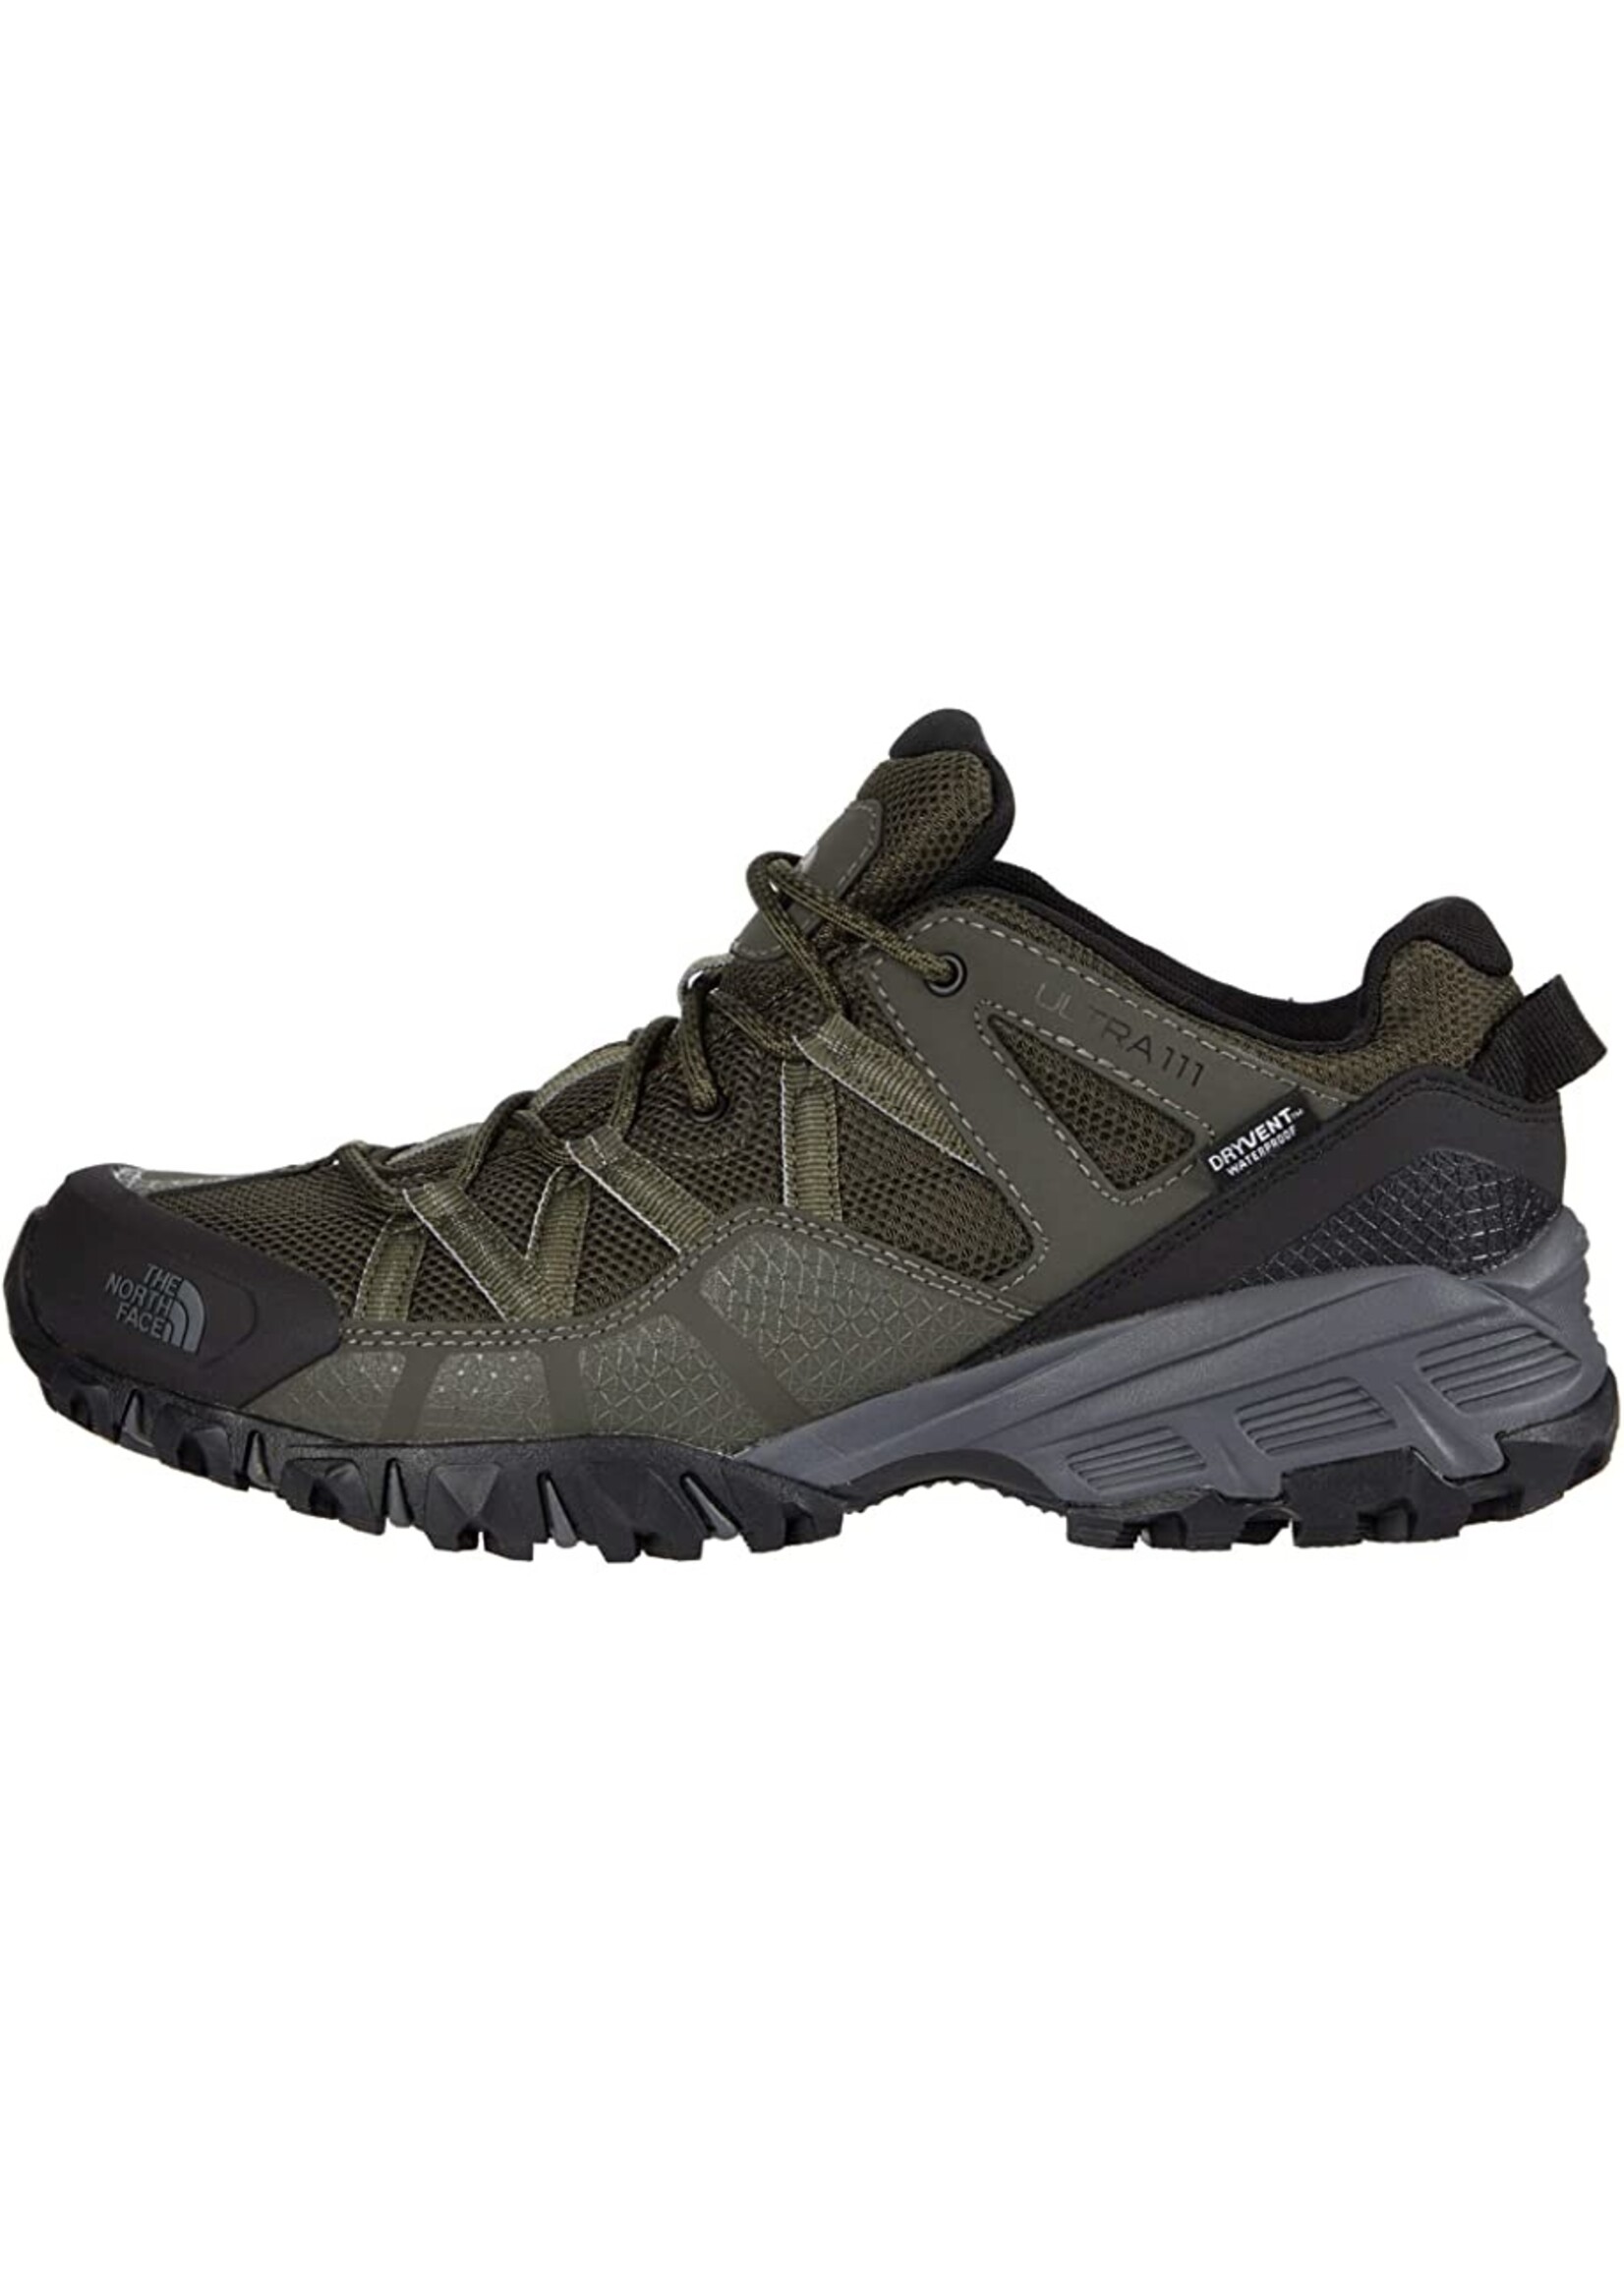 The North Face Men's Ultra 111 WP - New Taupe Green/Black